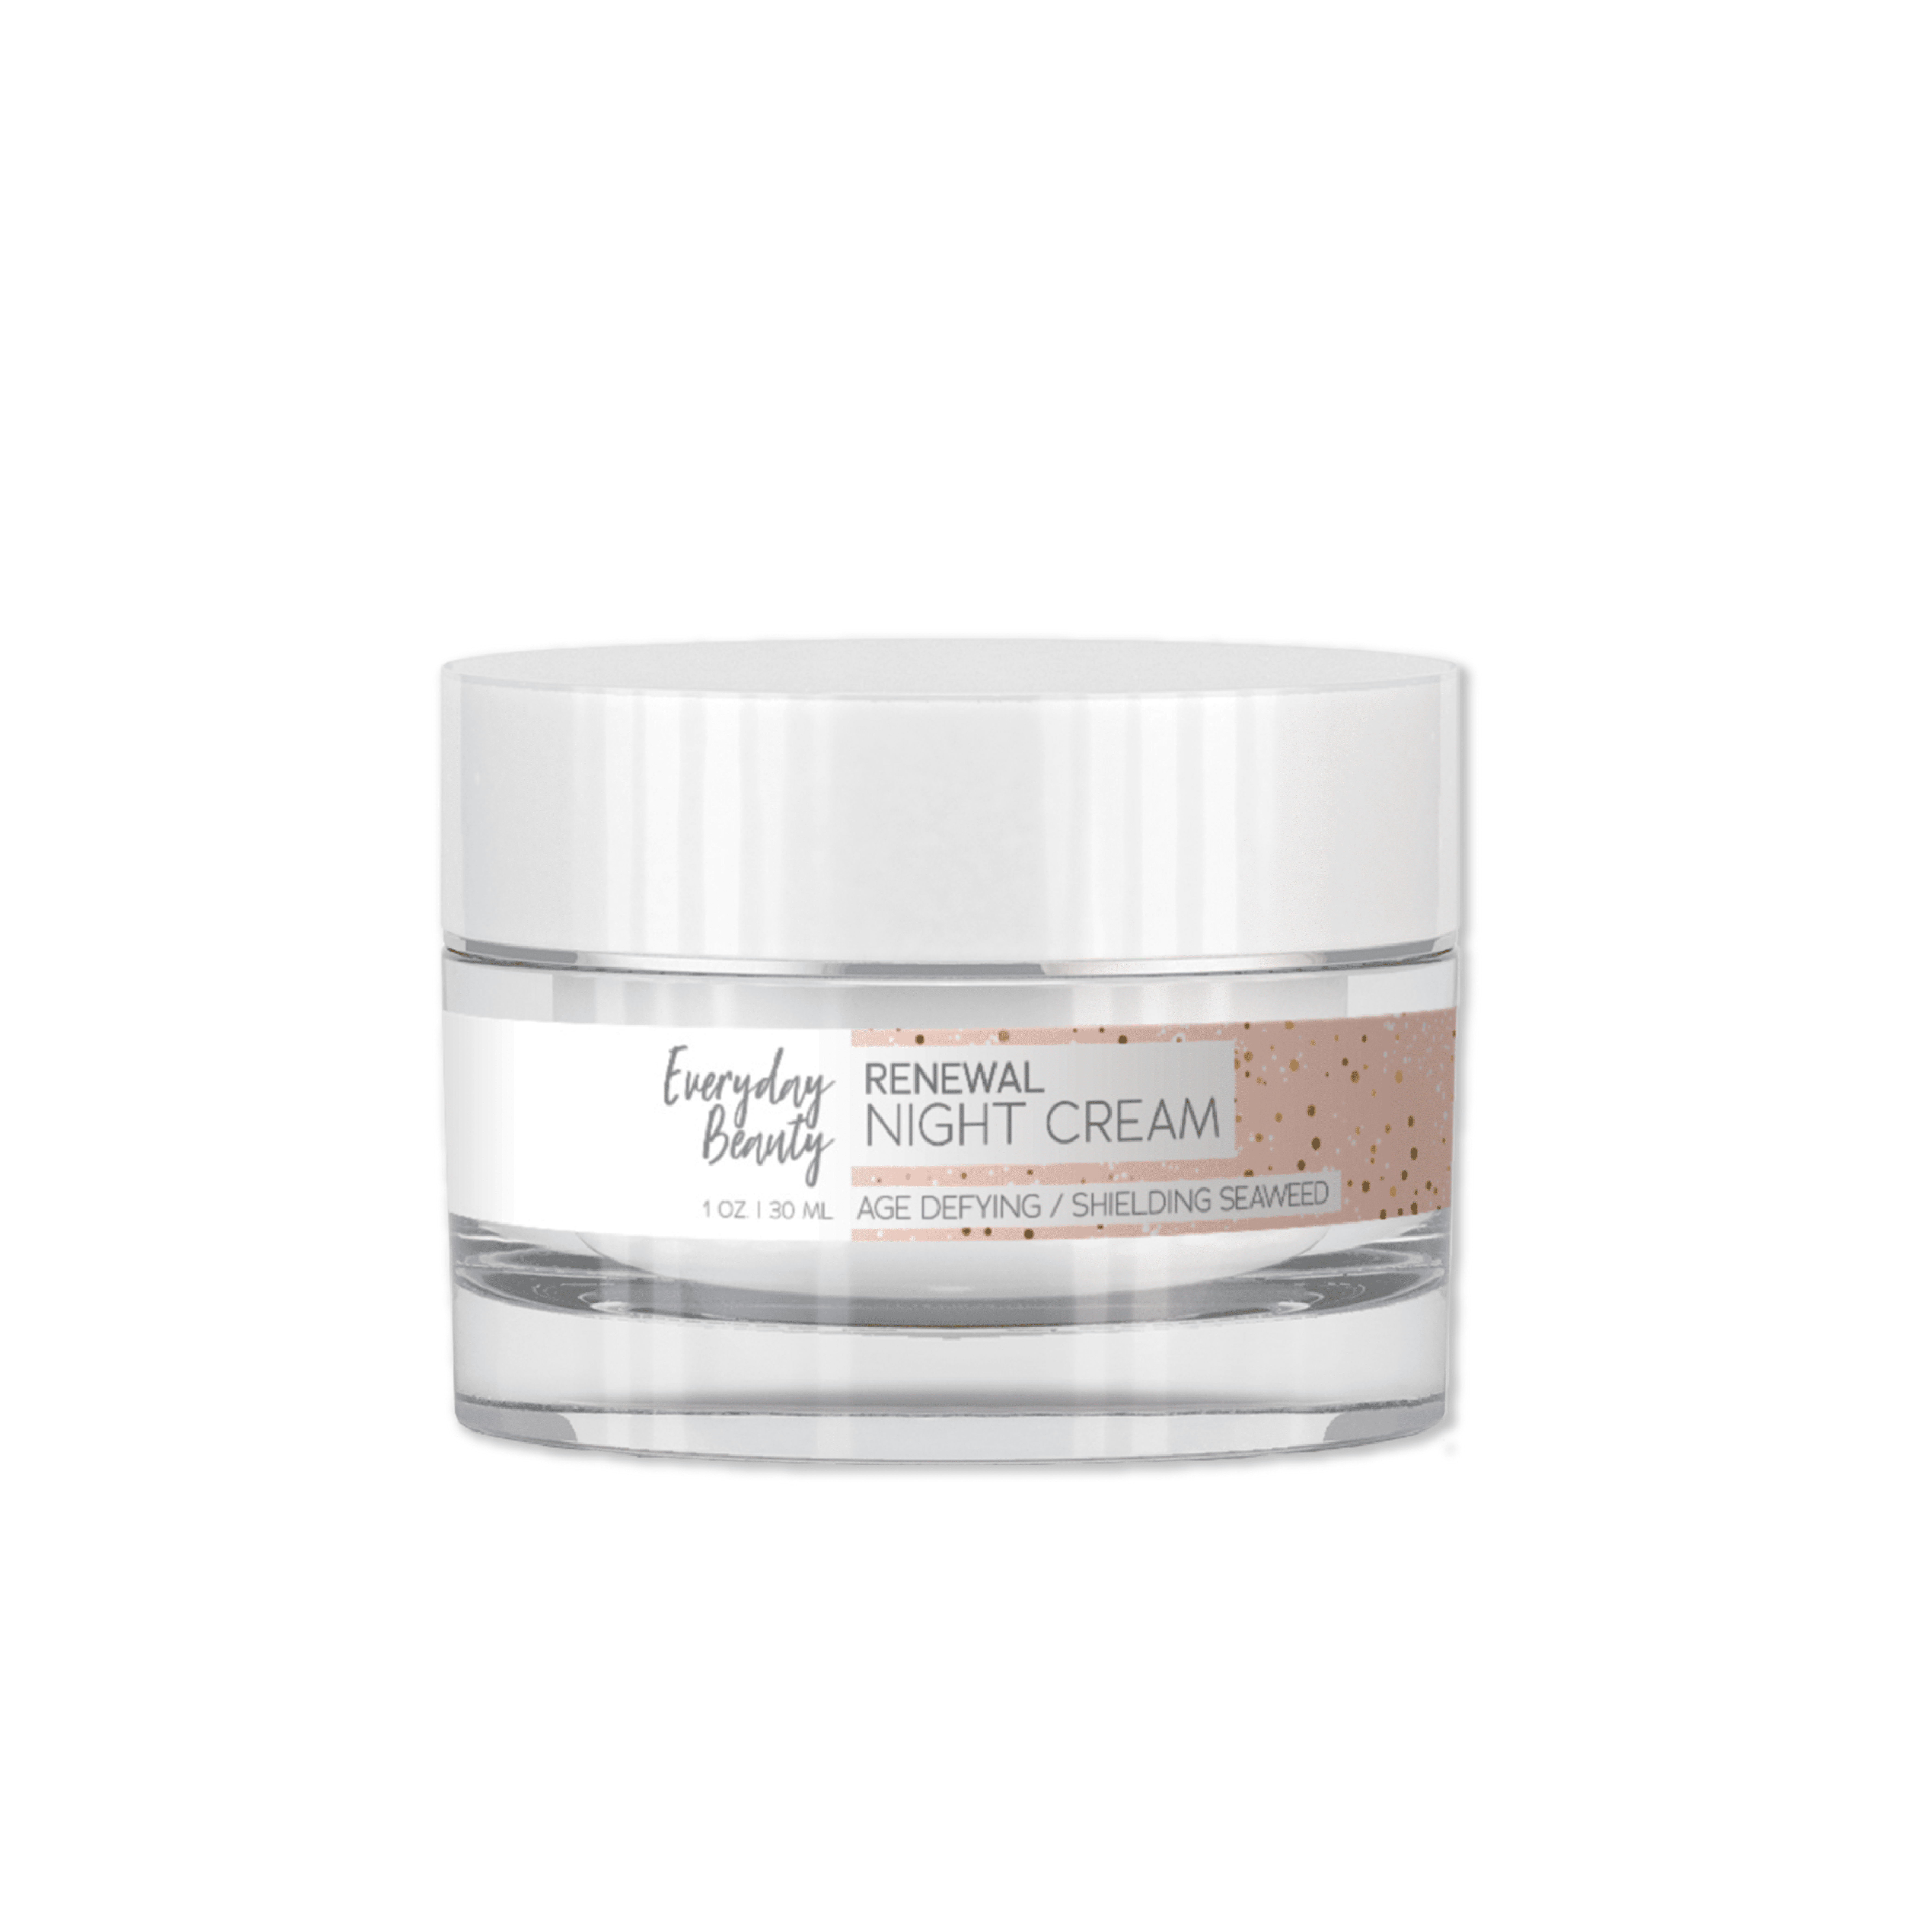 Doe voorzichtig Uitgestorven Categorie Everyday Beauty Renewal Night Cream Nourishing Facial Moisturizer with  Brown Algae Extract, Squalene, Hyaluronic Acid and Glycerin to Moisturize  and Protect Skin, Reduce Signs of Aging, 1 oz. Jar - Walmart.com